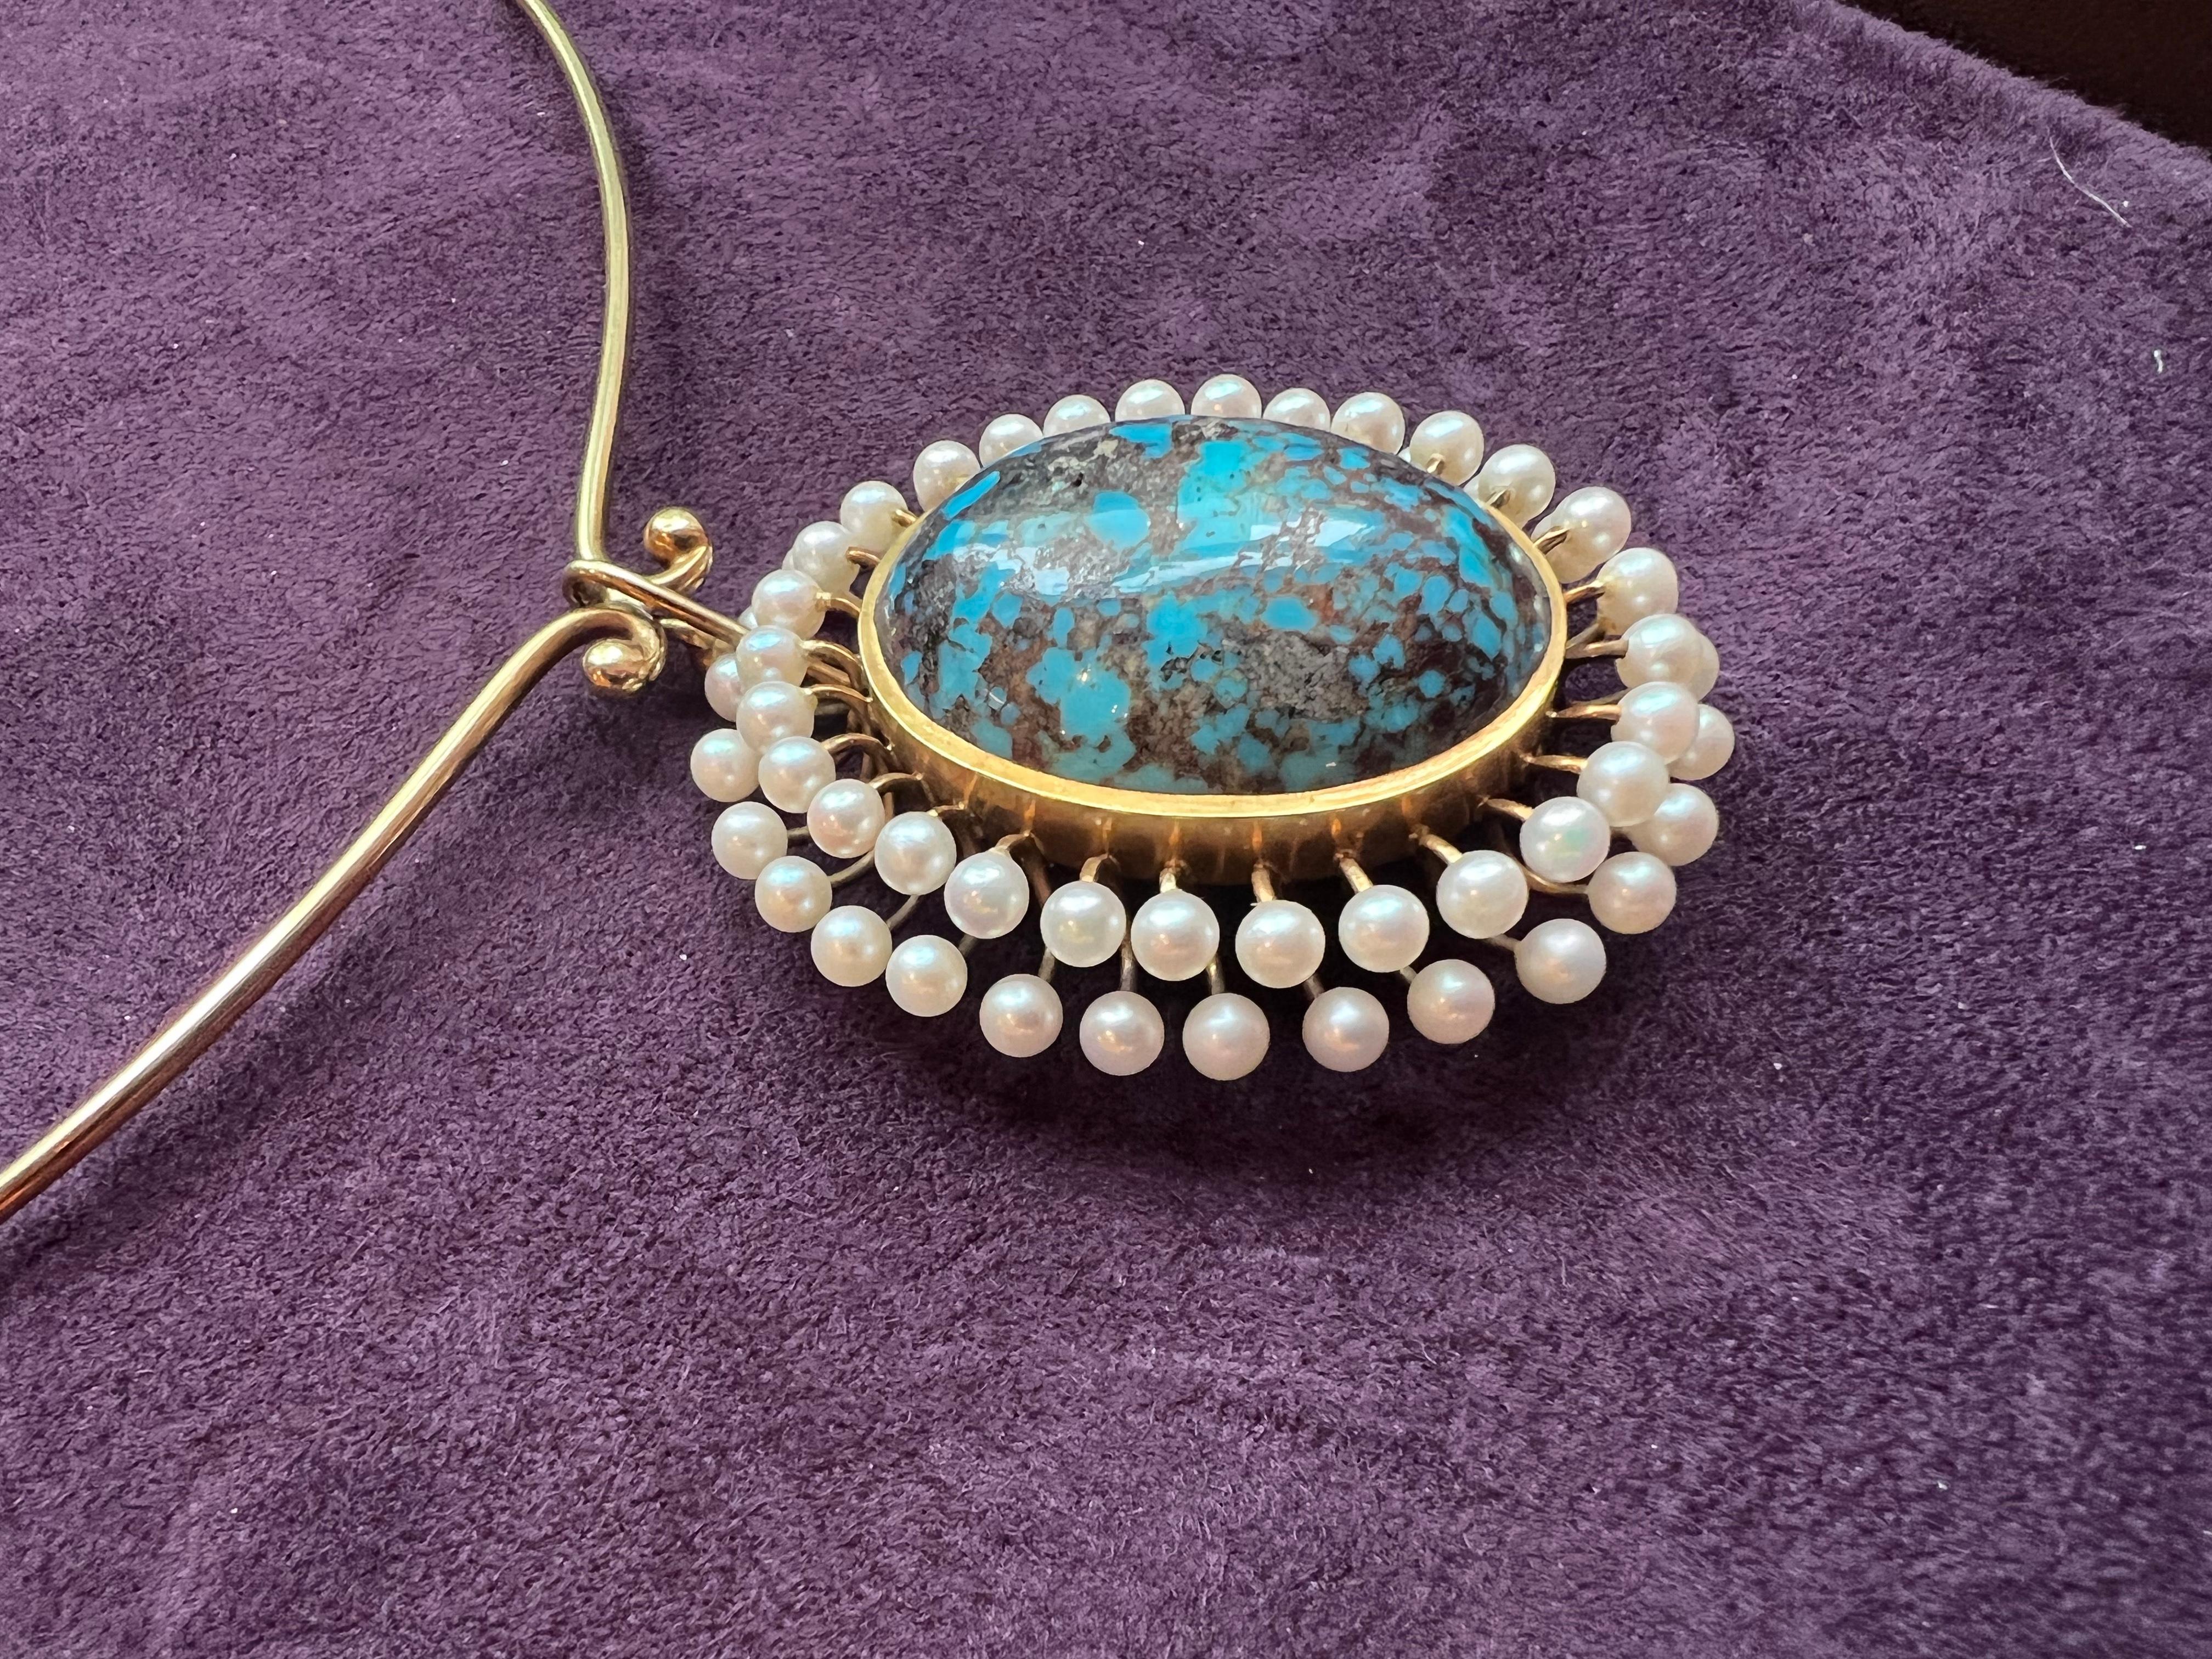 This finely wrought Danish pendant/brooch combination comprises a large oval Persian turquoise, pearls, and 14-karat yellow gold. It was hand fabricated by Jorgen Peter Vang in the 1960s. The neckpiece is a delicate beauty which will enhance any